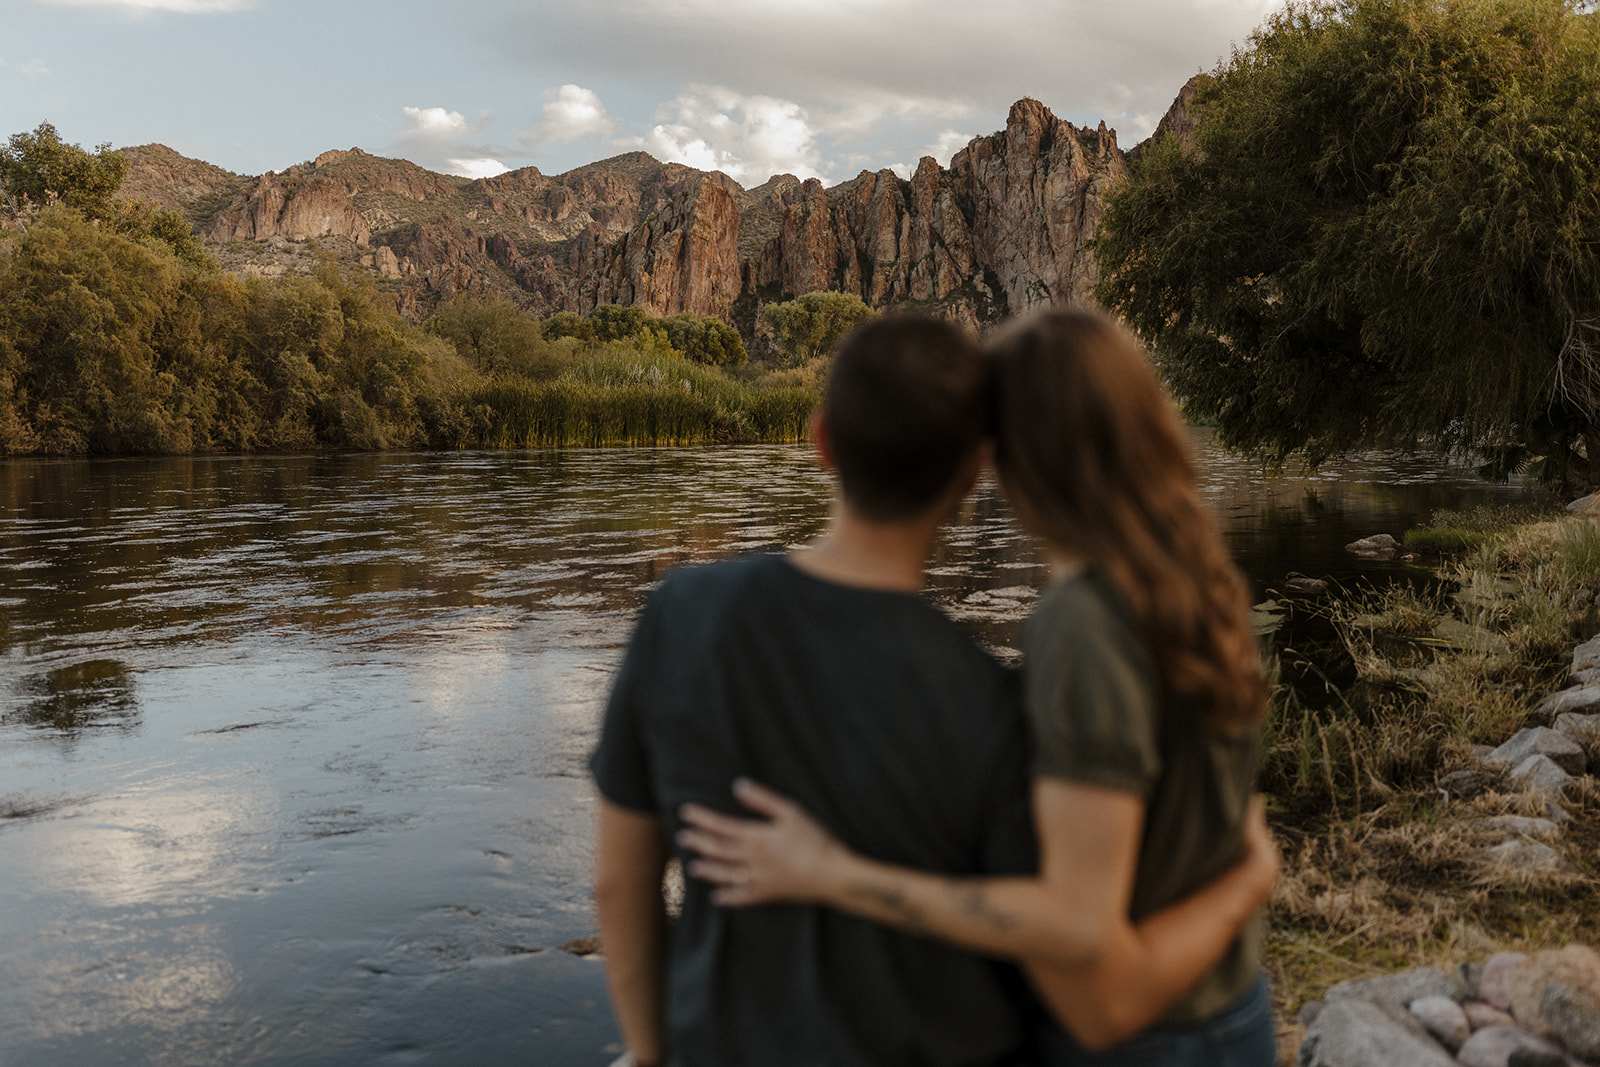 couple blurred out with river and mountain background in focus 